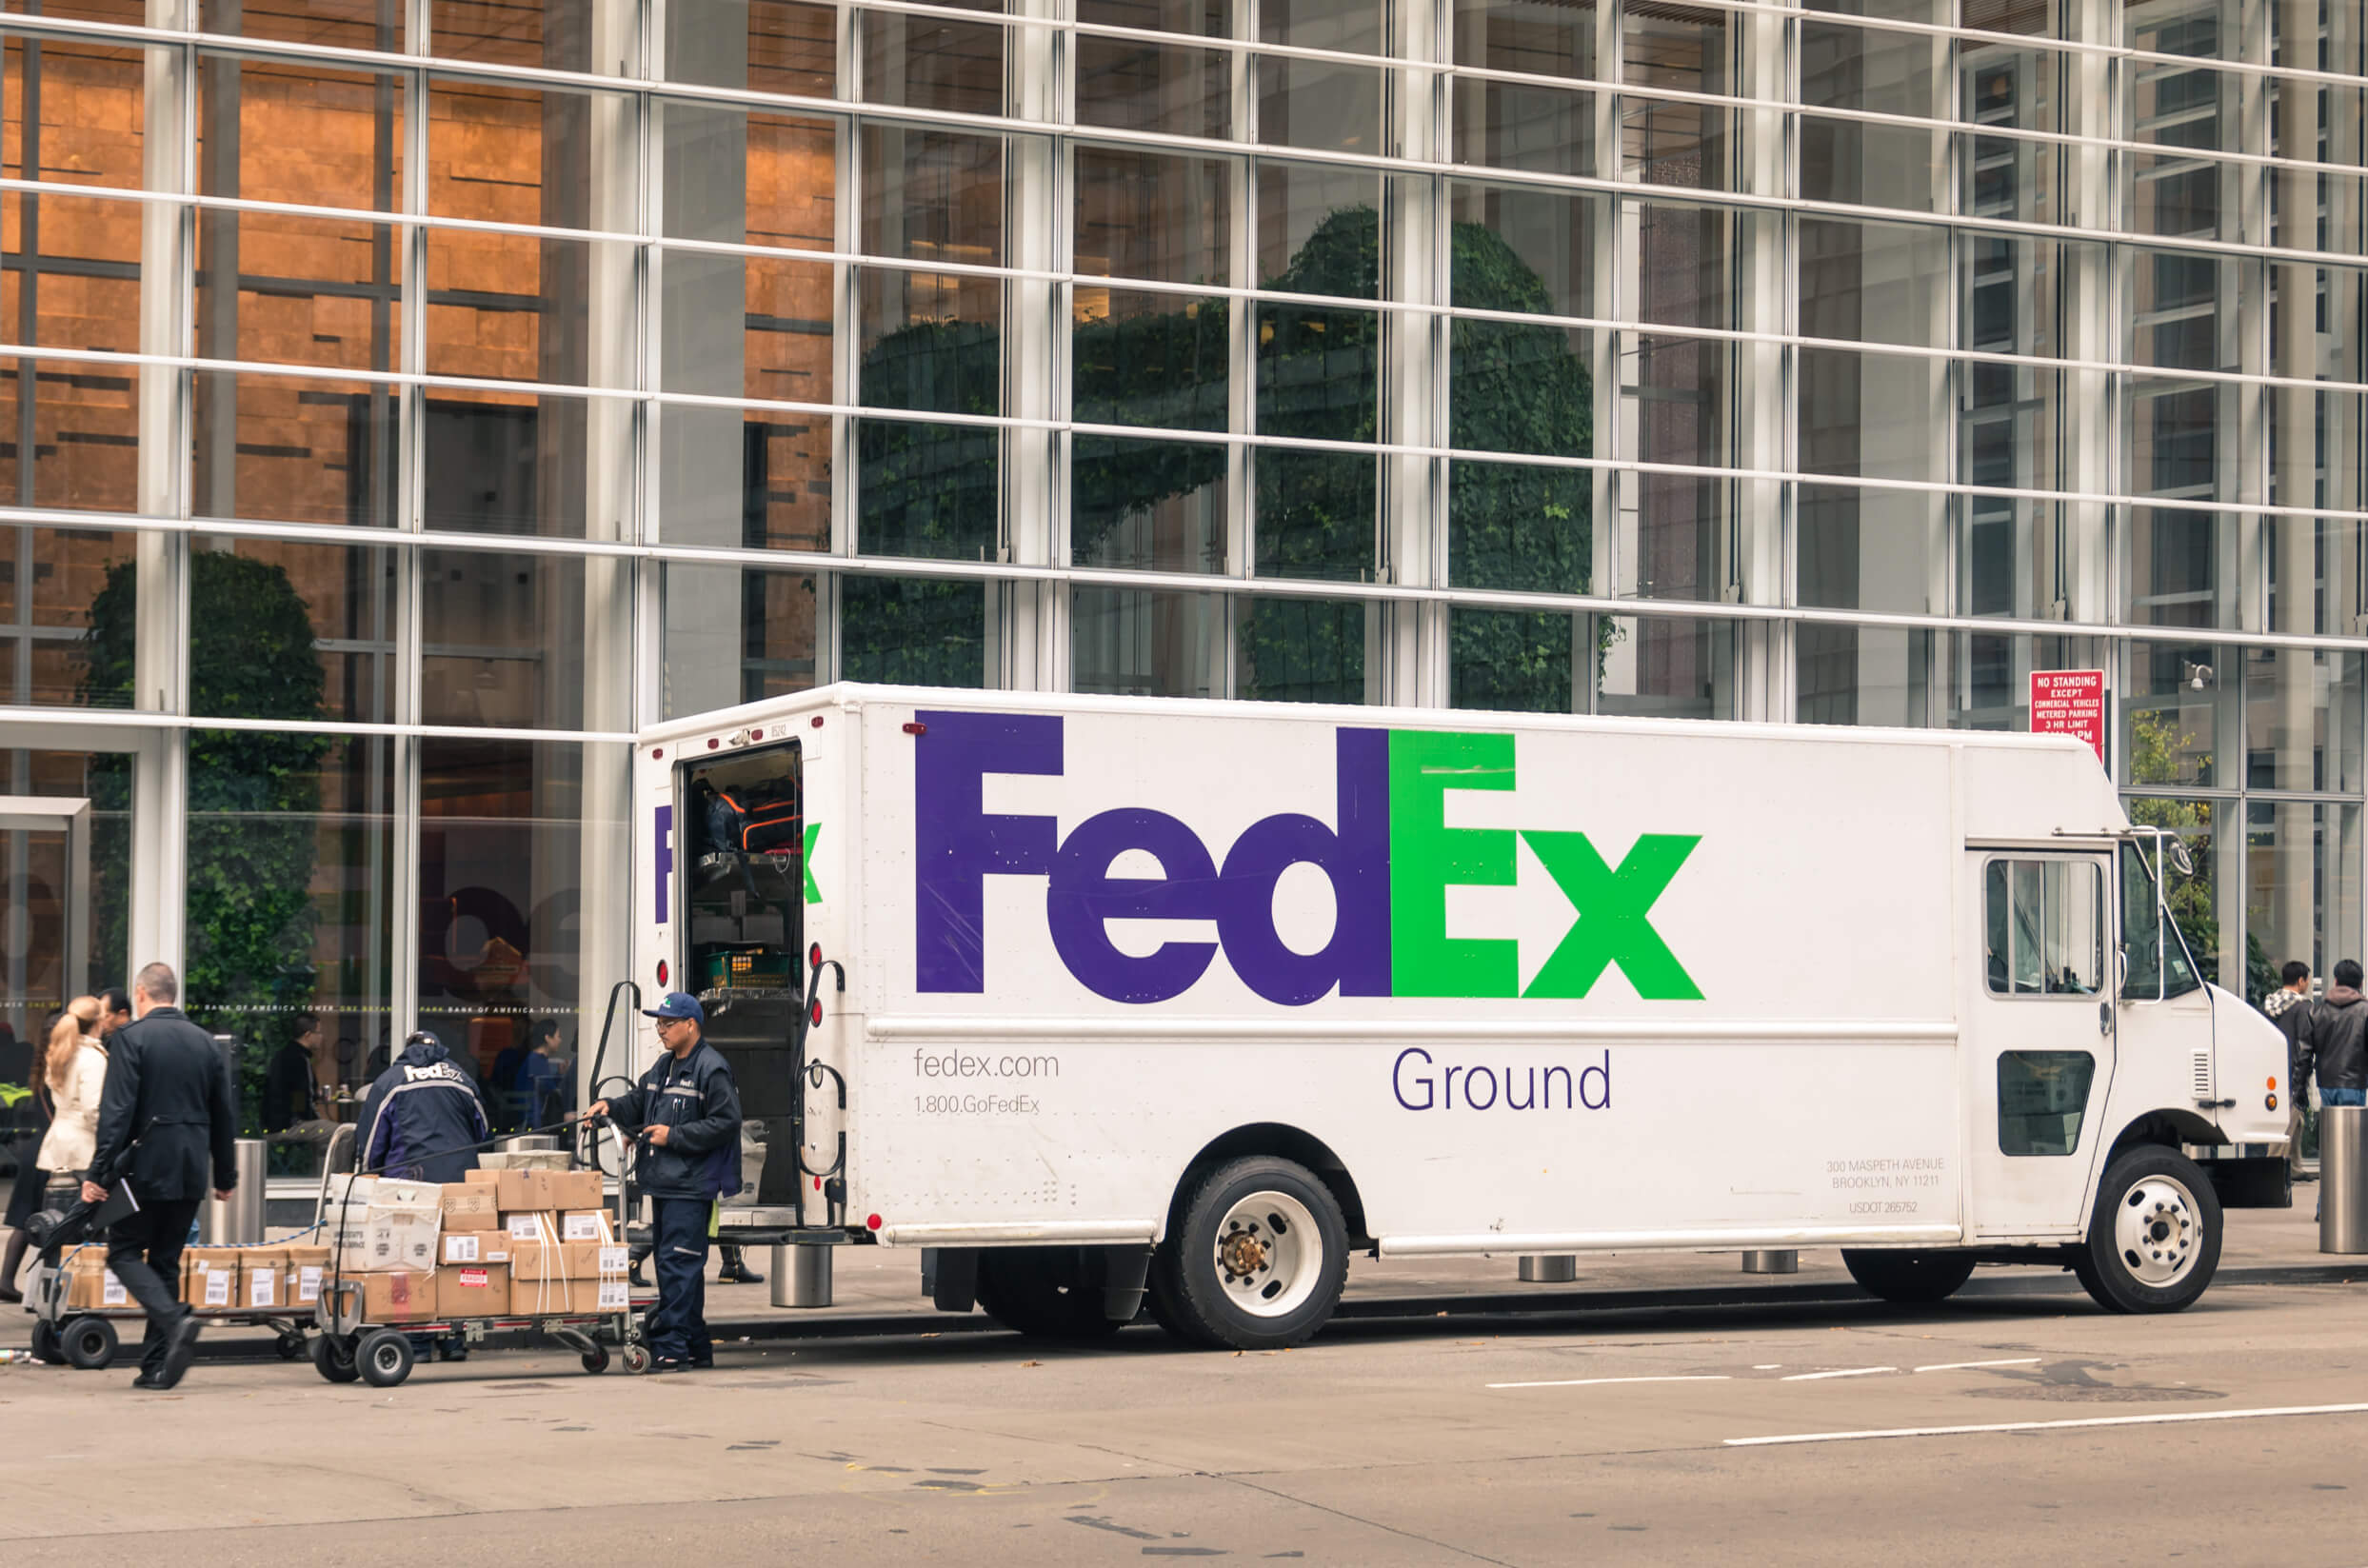 Fedex Express Ground Collaboration Will Improve Last Mile Delivery